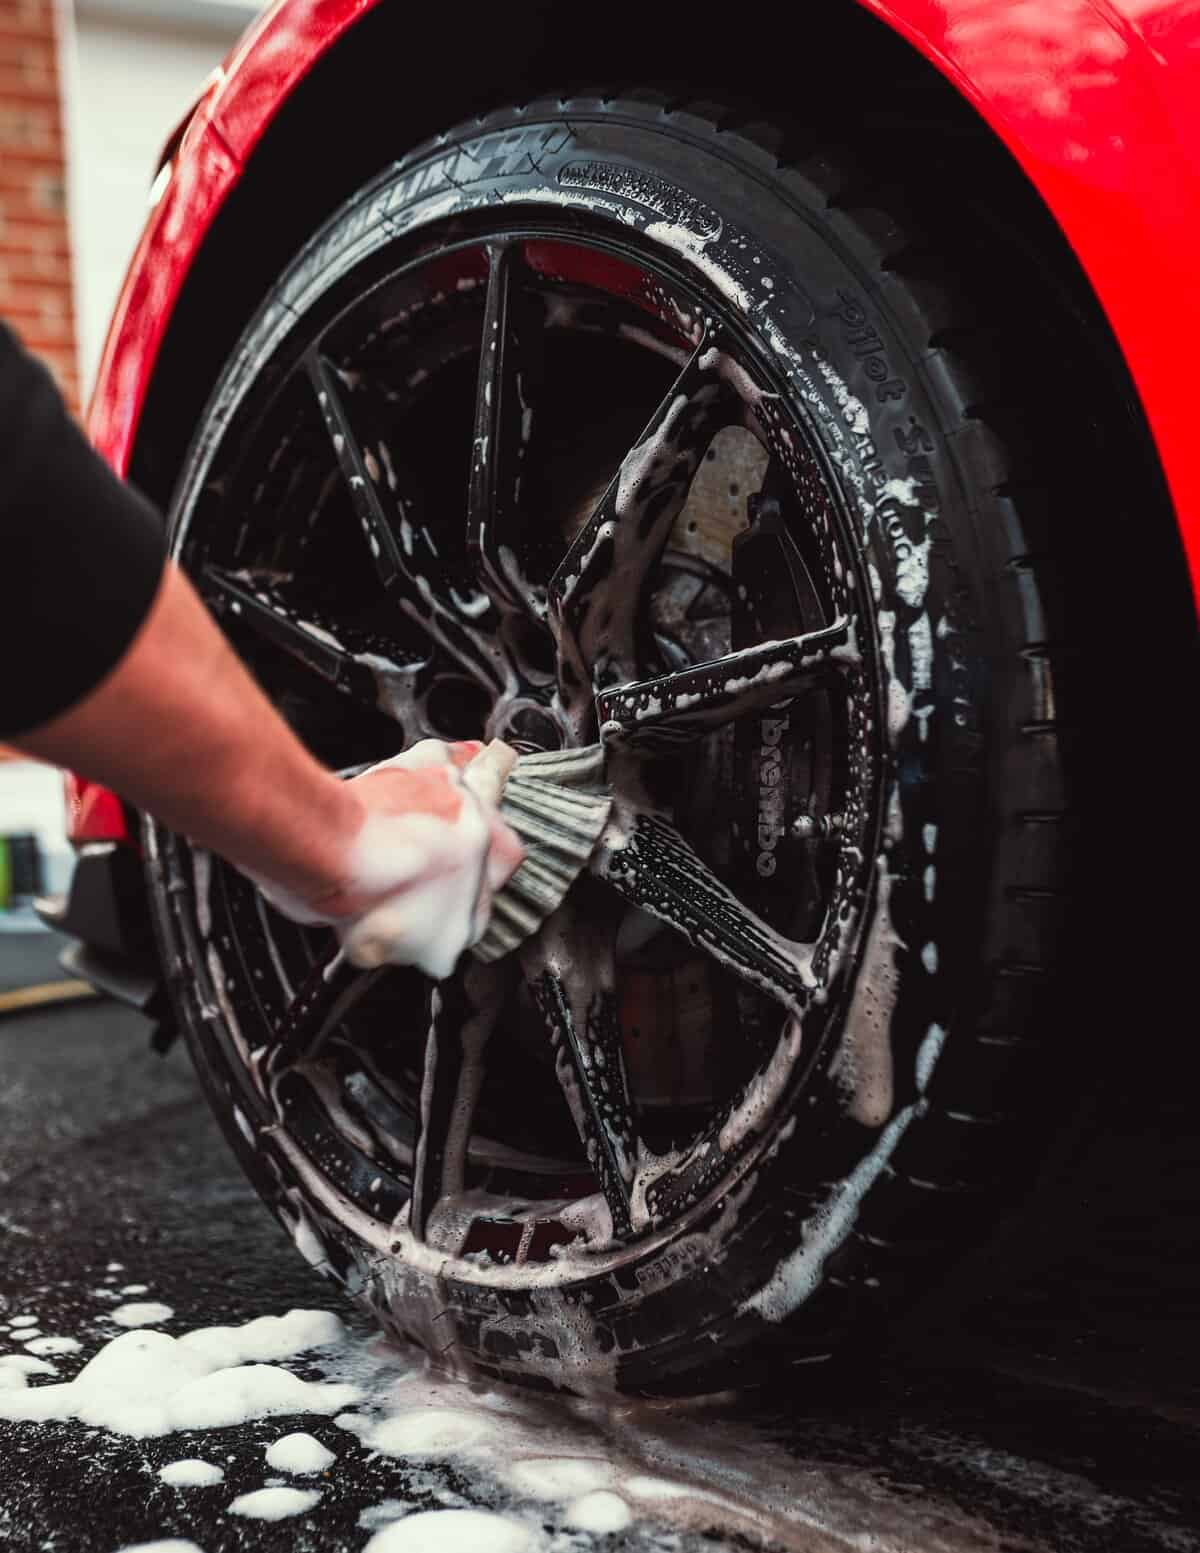 Wheels being cleaned using a soft wheel brush